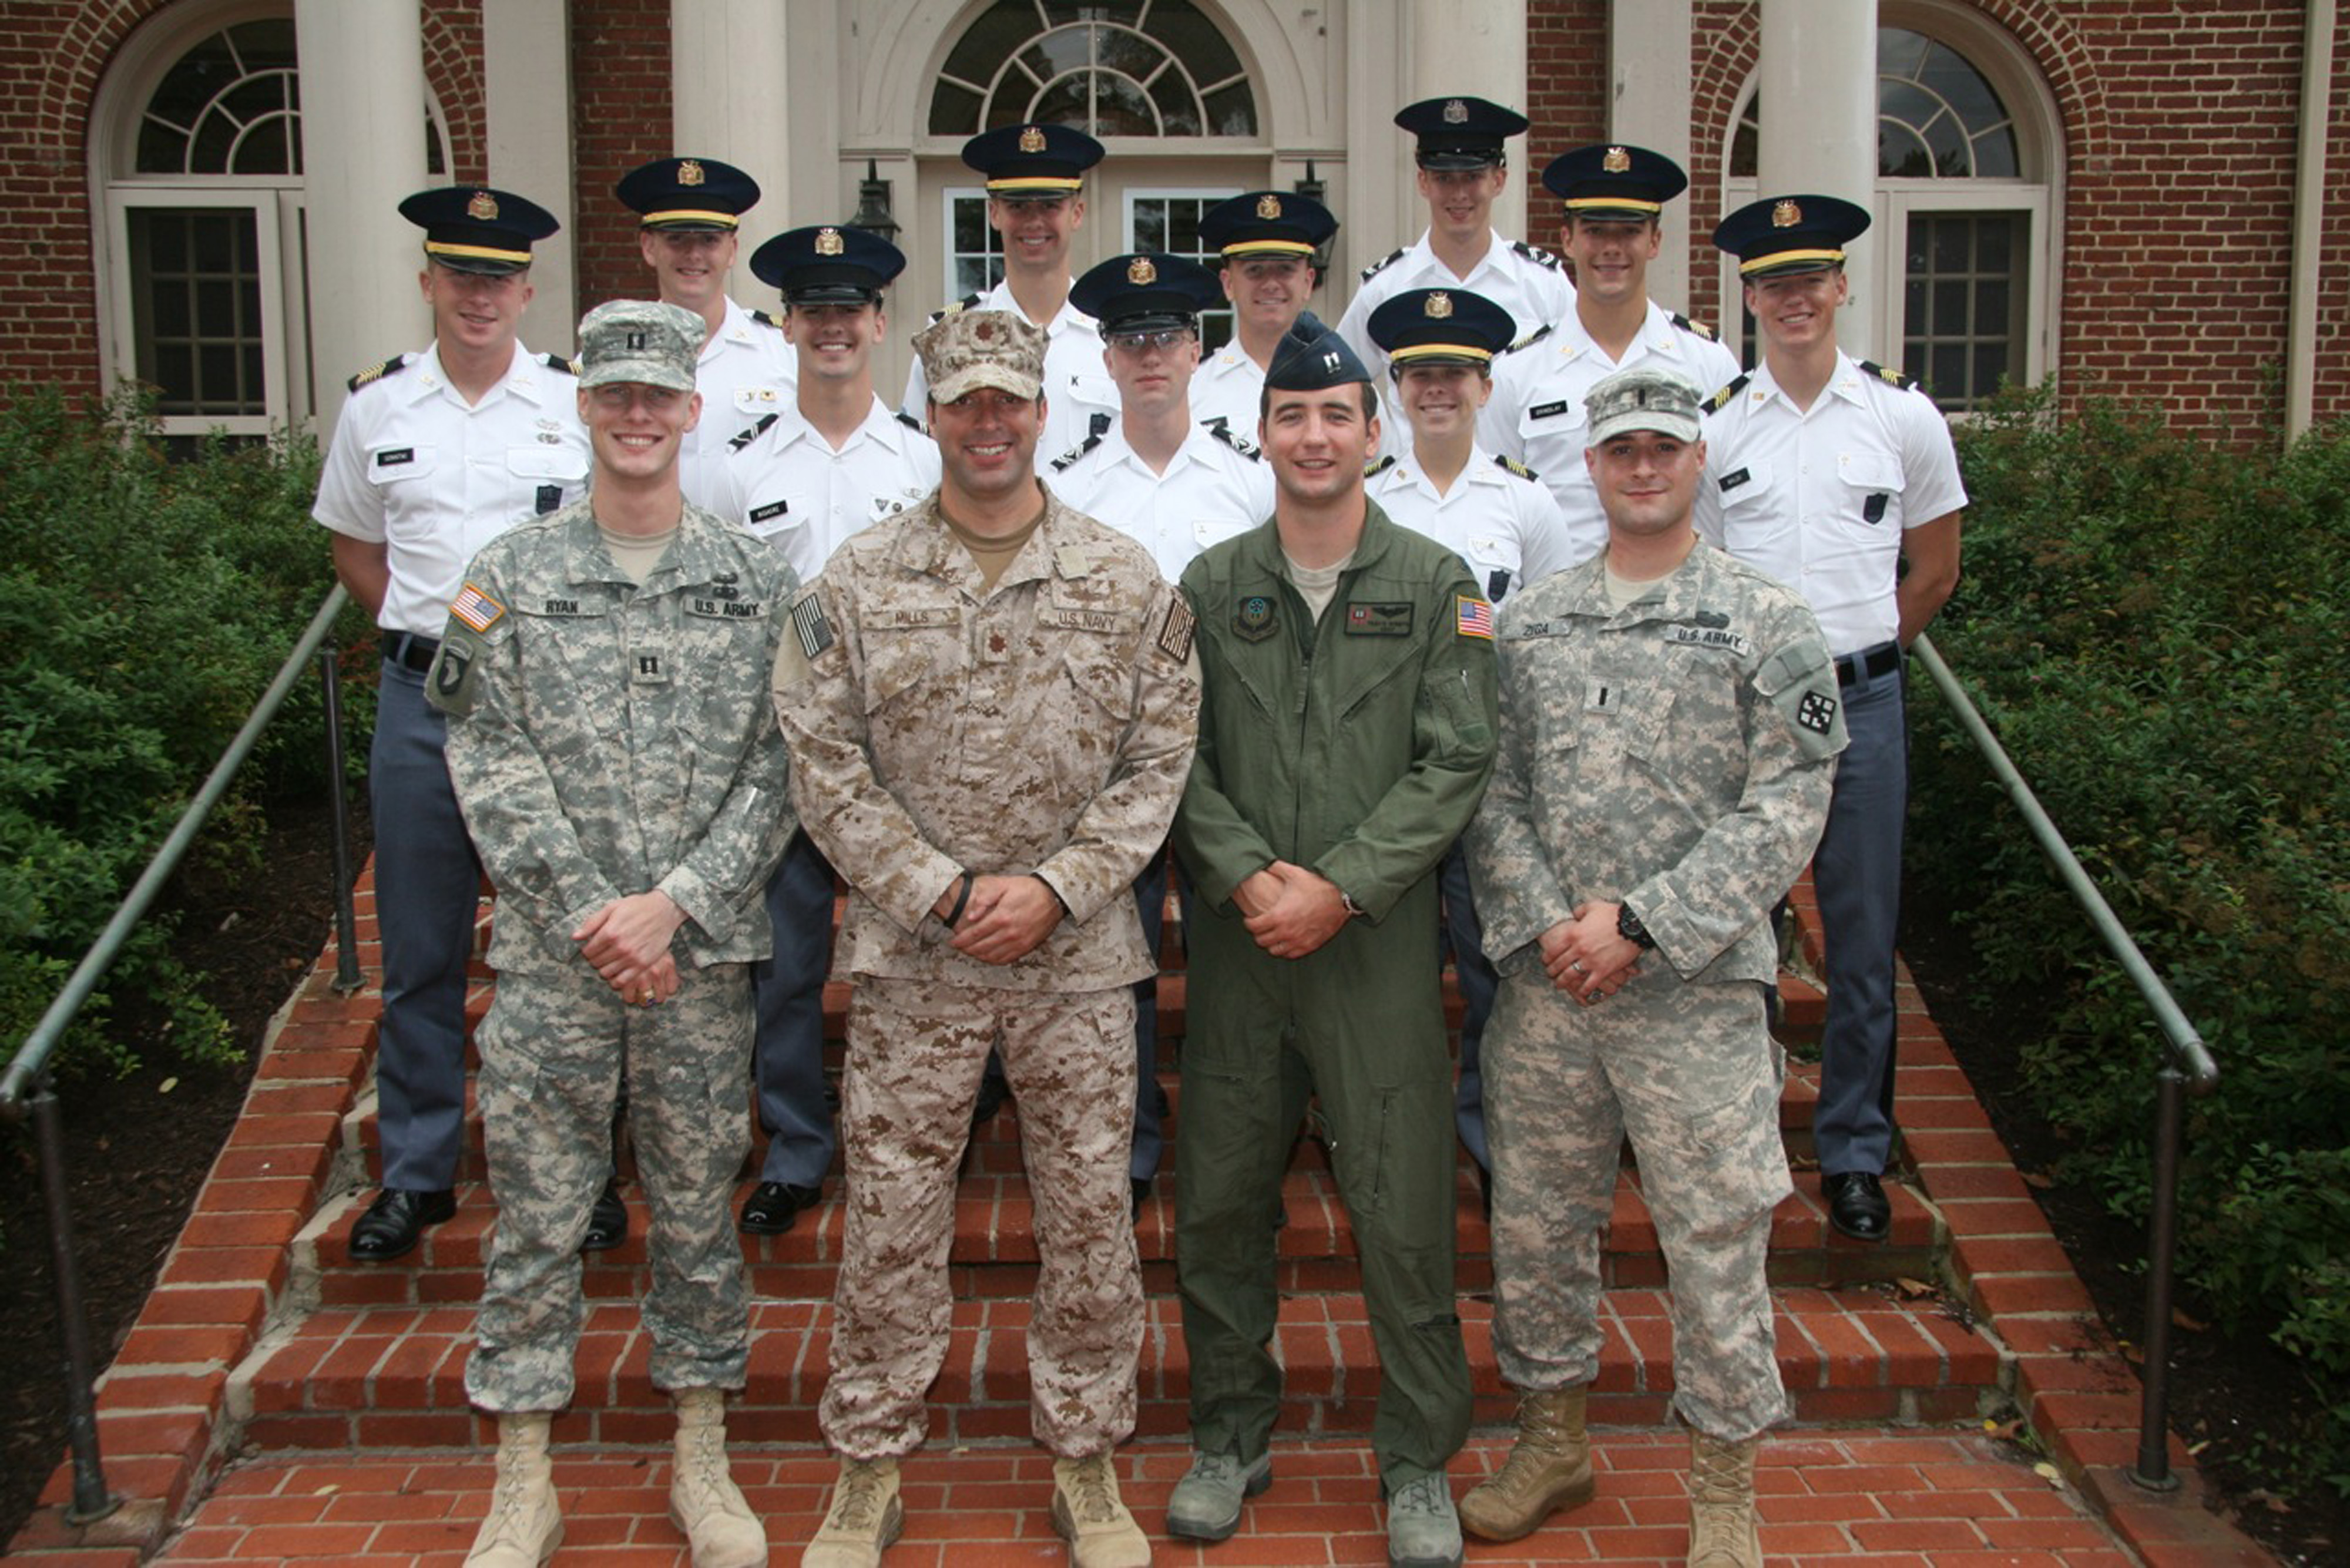 U.S. Army, U.S. Navy, and U.S. Air Force combat veterans with members of the Virginia Tech Corps of Cadets who spoke at the Fall 2011 Gunfighter Panel